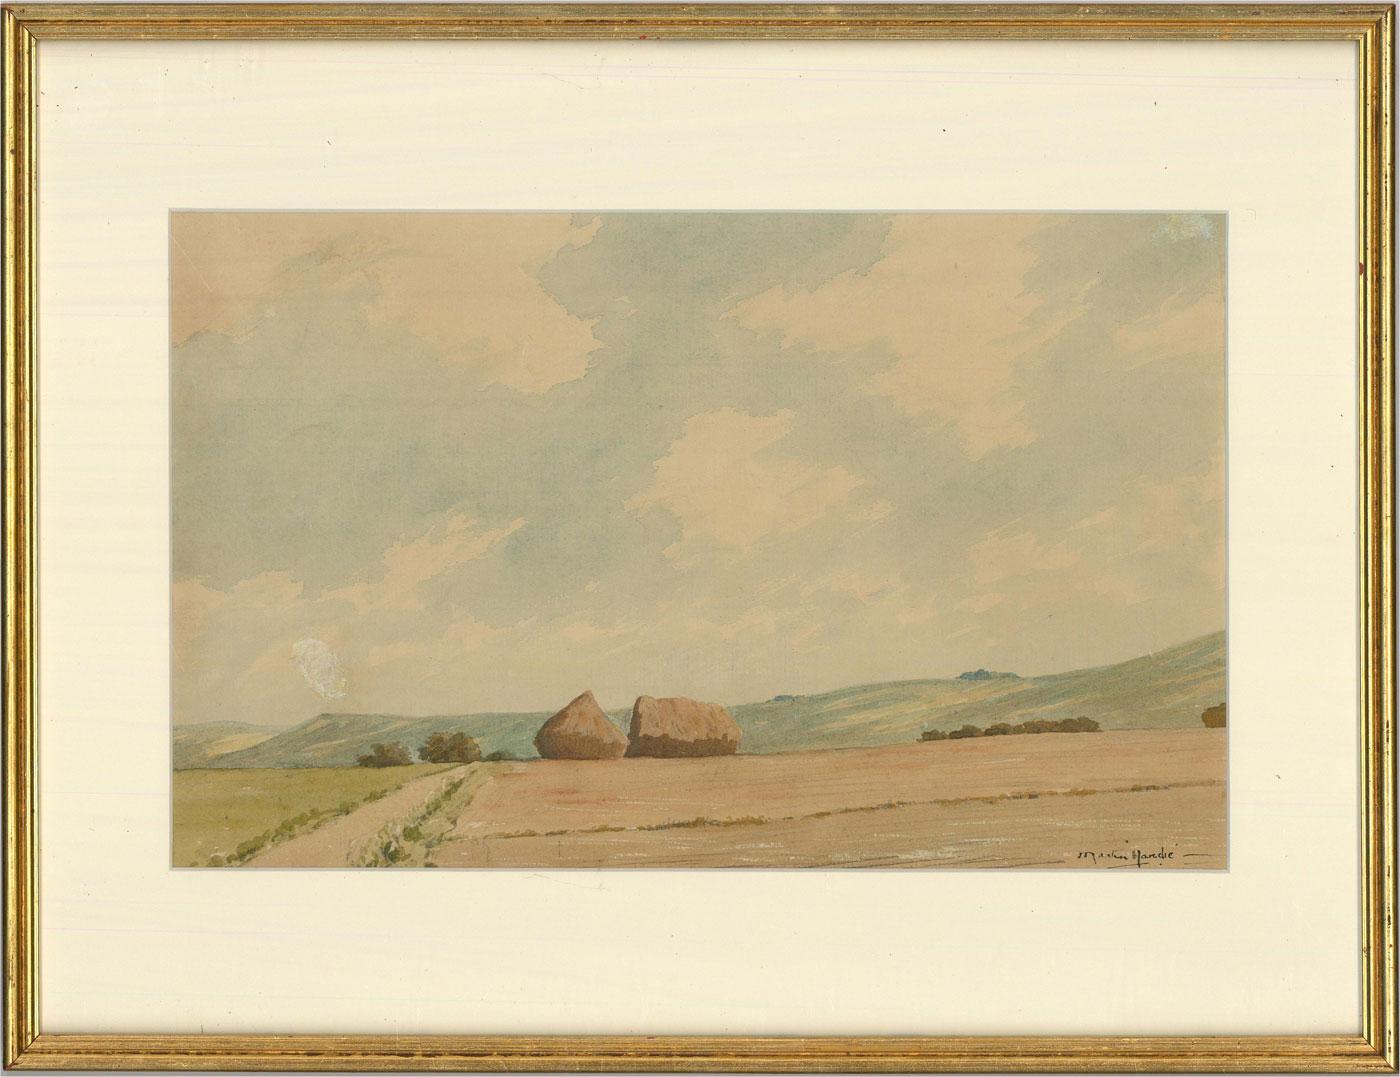 A fine watercolour view of a harvested hay field with hay stacks in the distance with the rolling hills of the South Downs, Sussex, on the horizon. The artist has signed to the lower right and inscribed, dated and signed to the reverse of the laid.